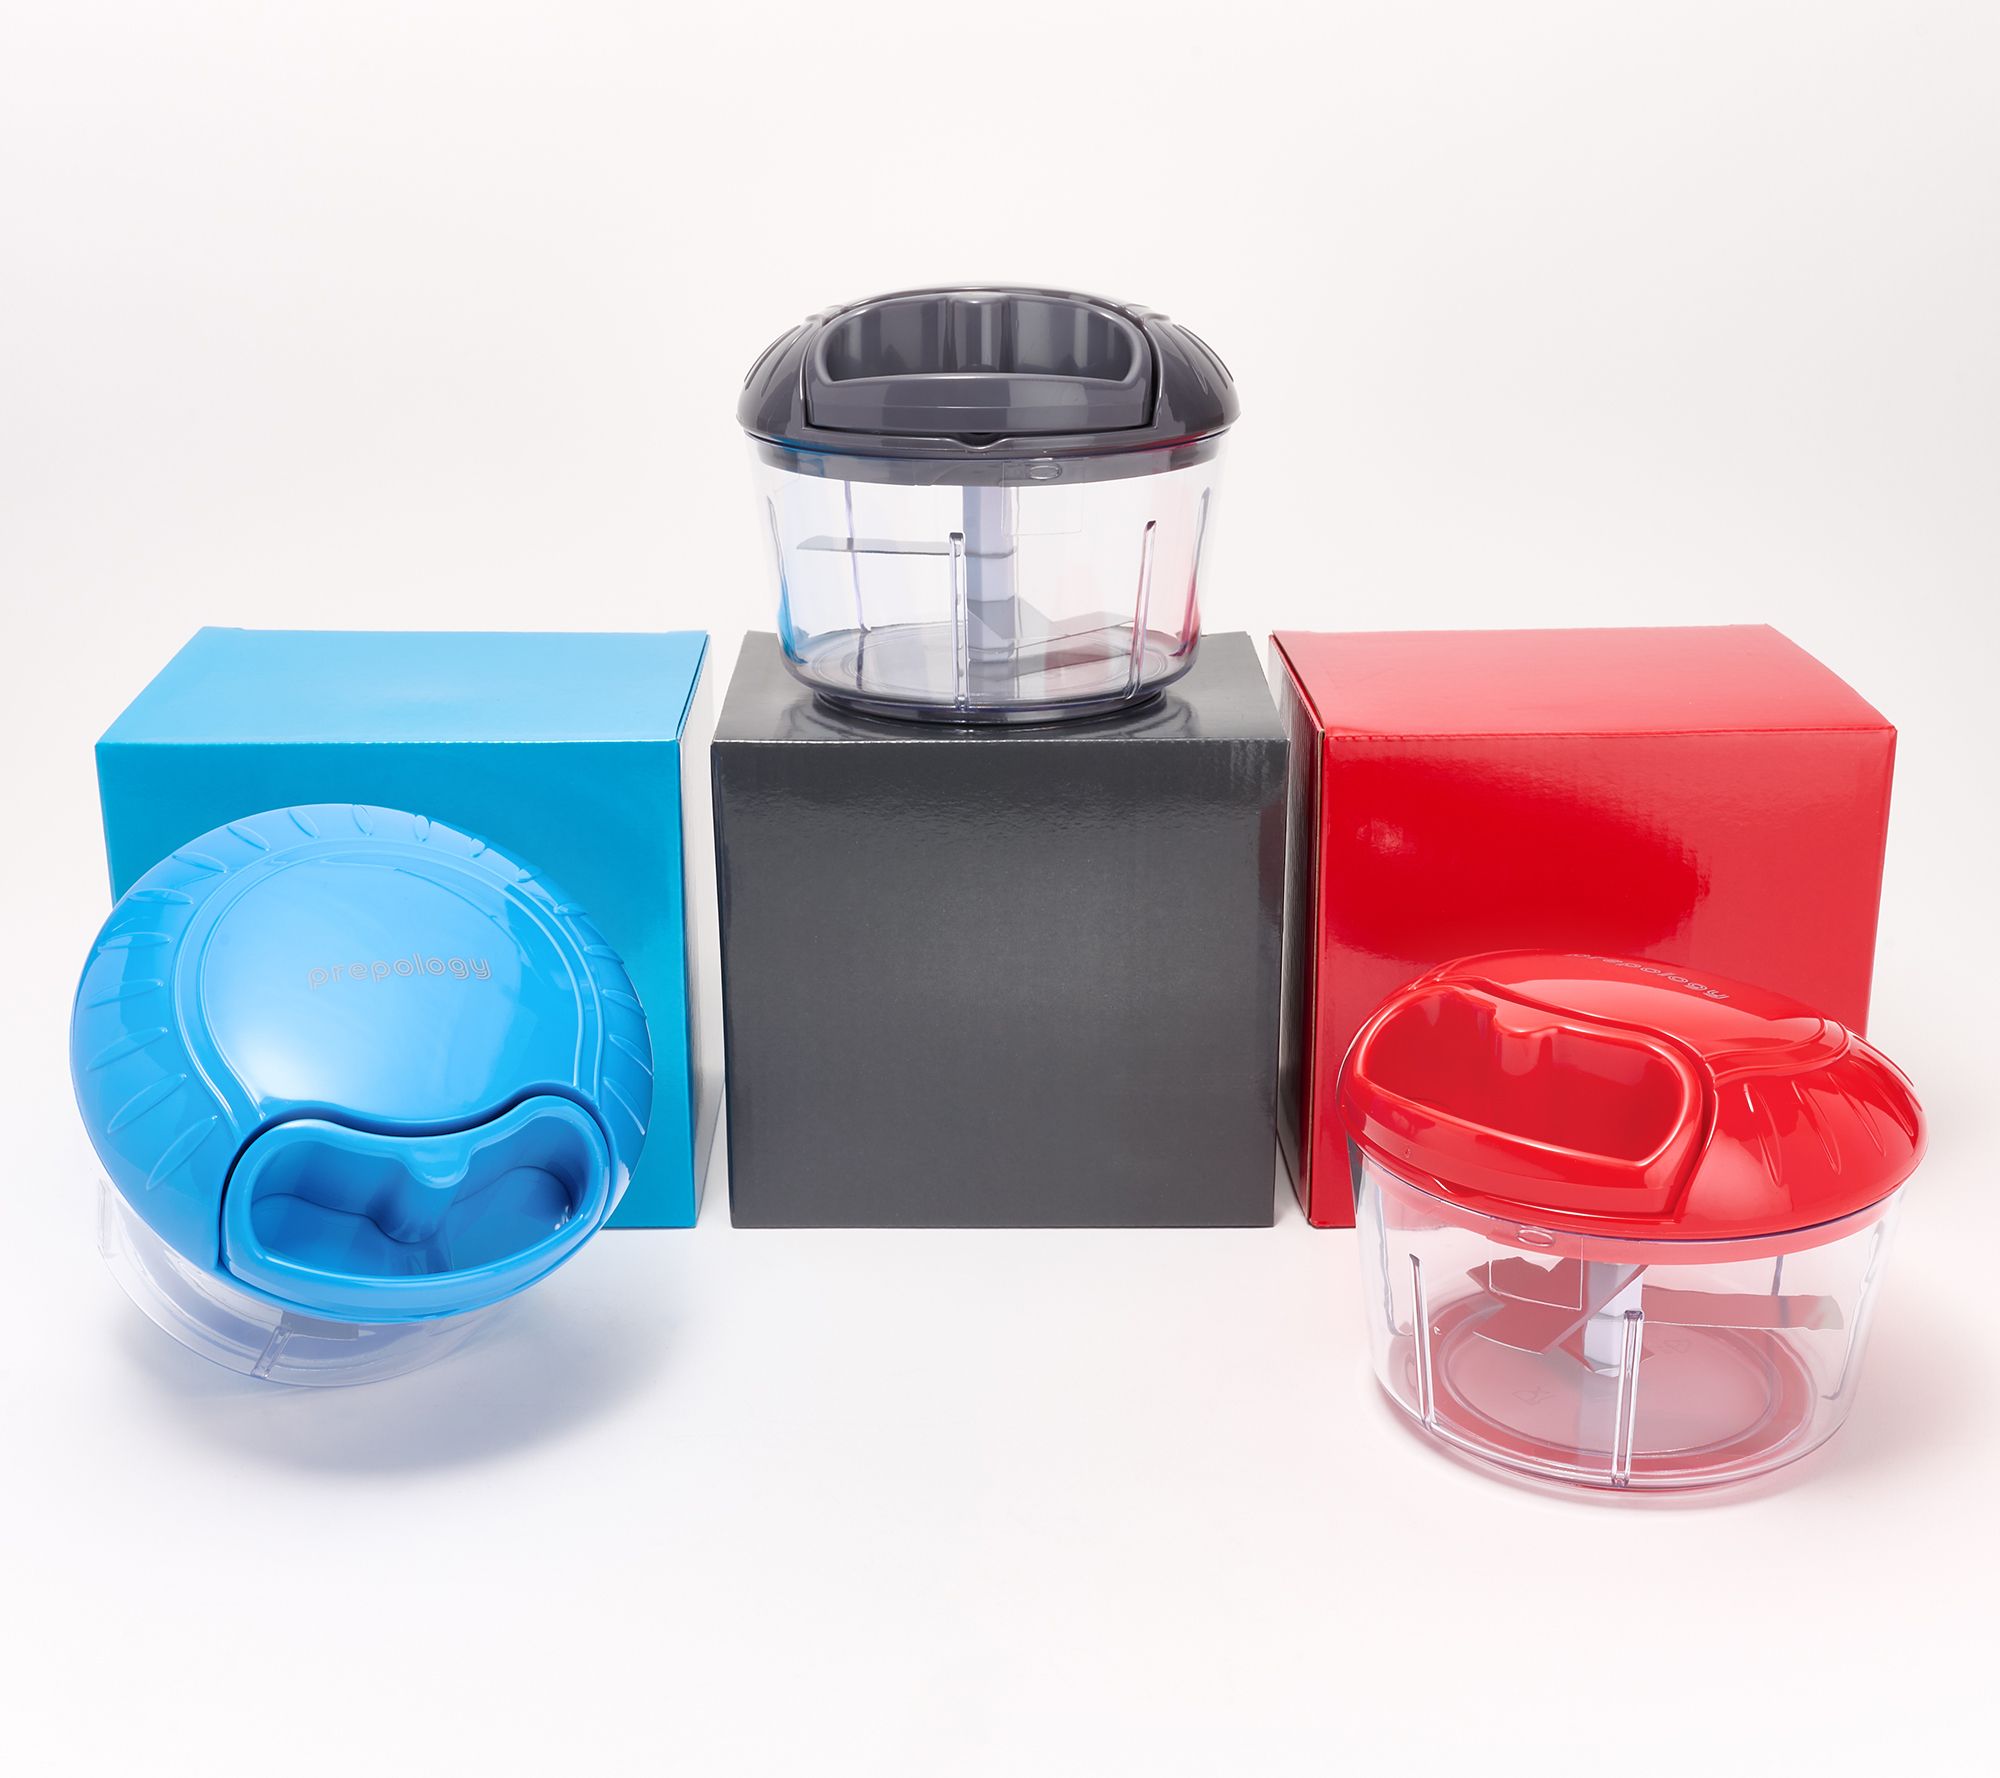 Prepology Rechargeable Mini Chopper w/ Extra Cups & Storage Lids NEW